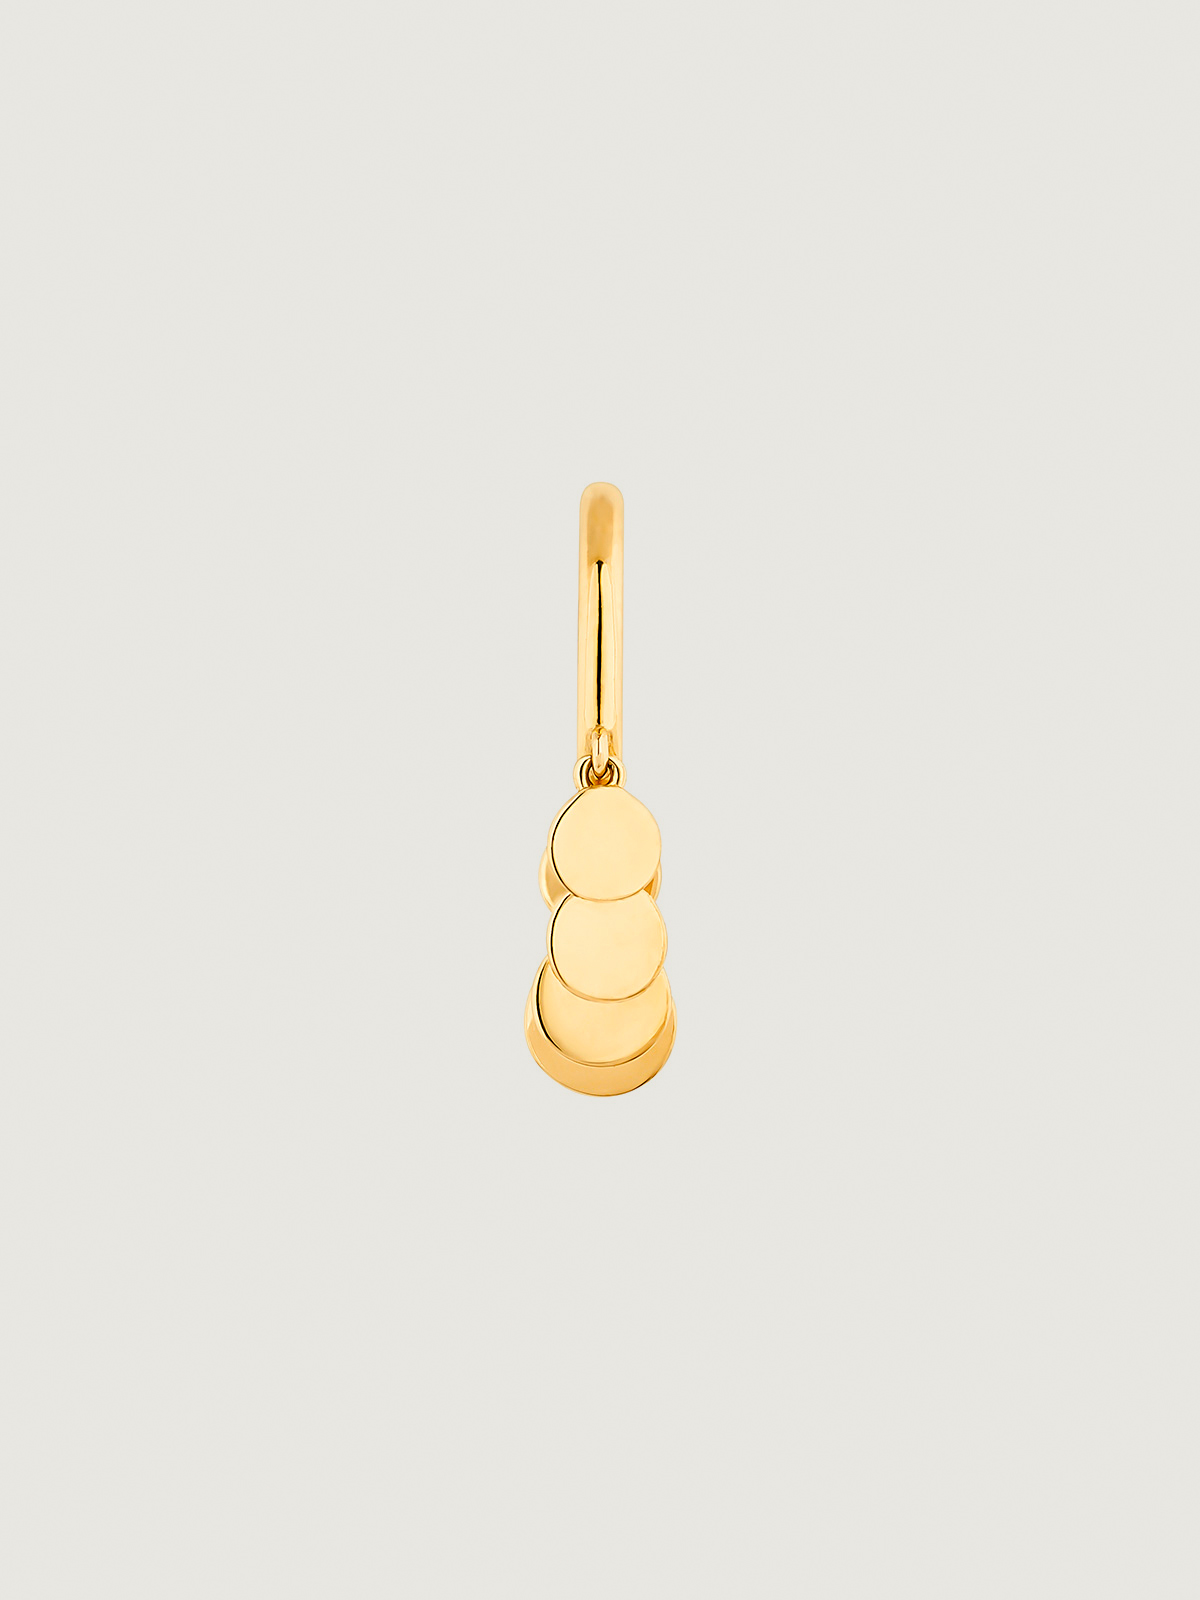 Individual 9K yellow gold earring with hanging spheres.